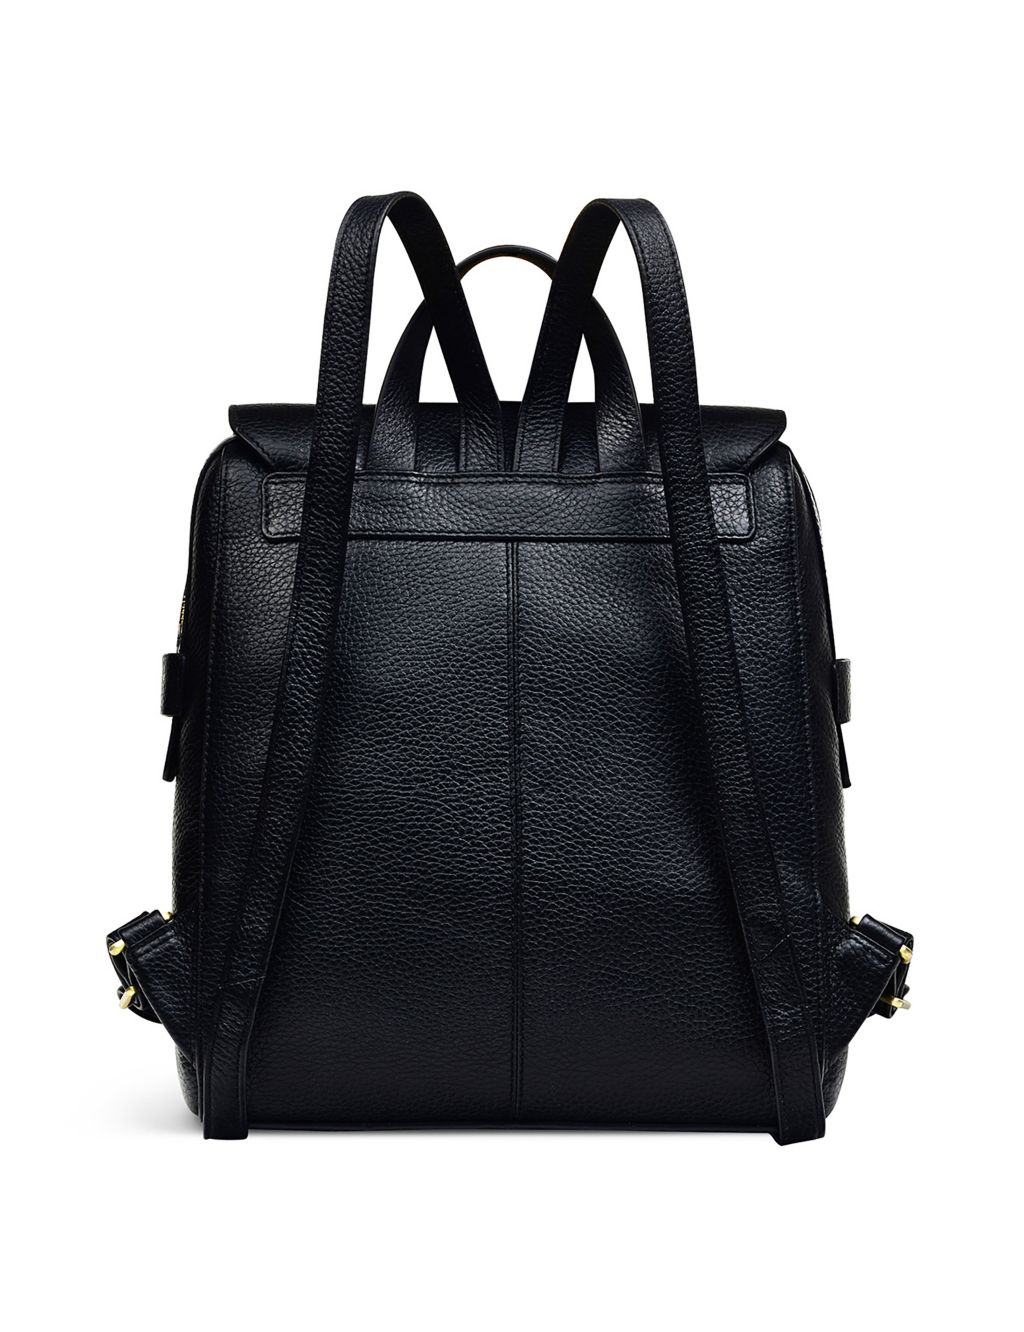 Lorne Close Leather Backpack image 2